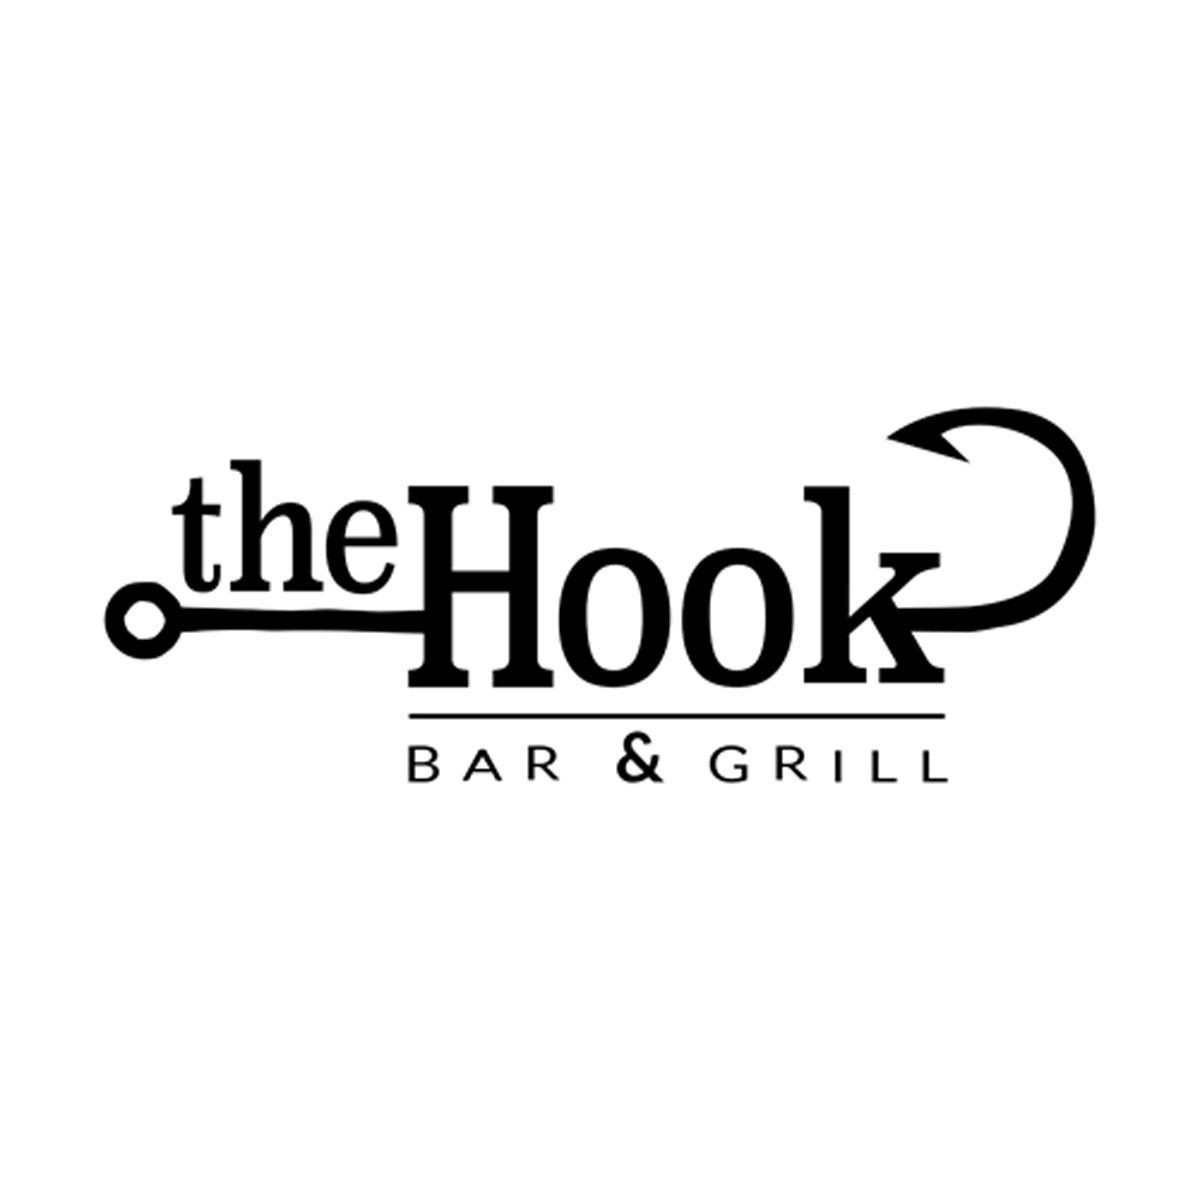 Restaurant Bar and Grill Logo - The Hook Bar and Grill Logo